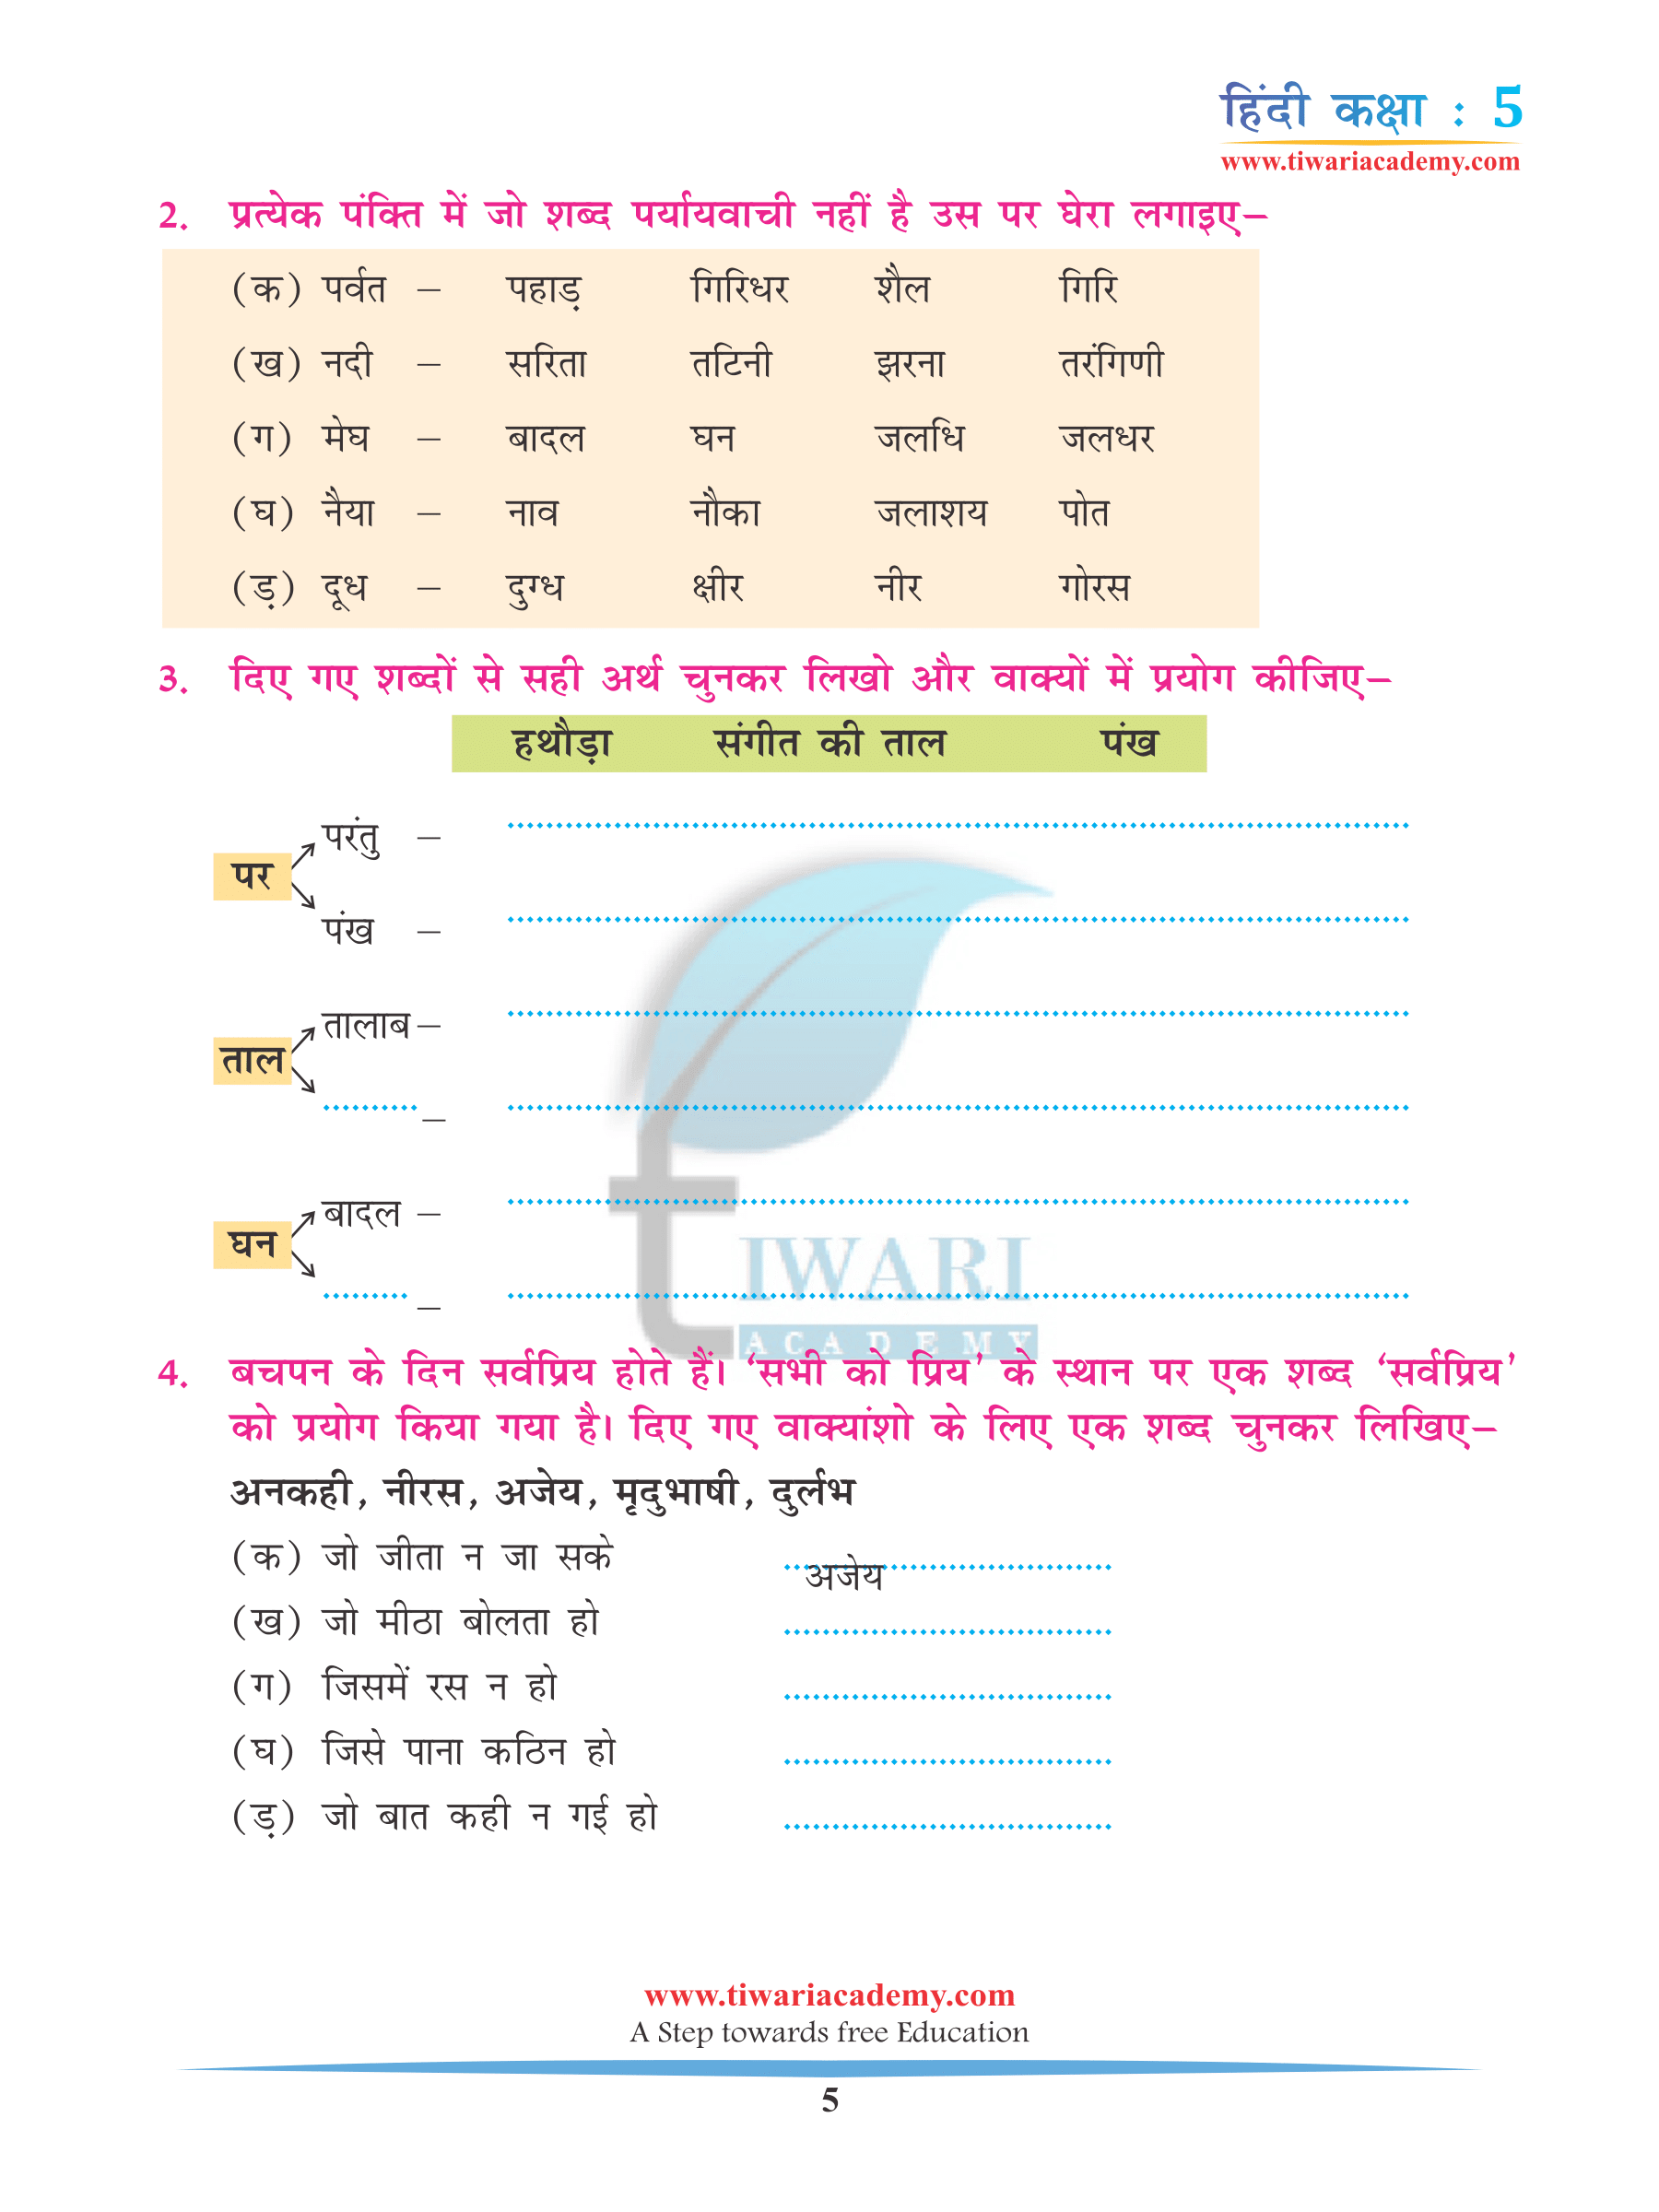 NCERT Solutioins Class 5 Hindi Chapter 5 Question Answers